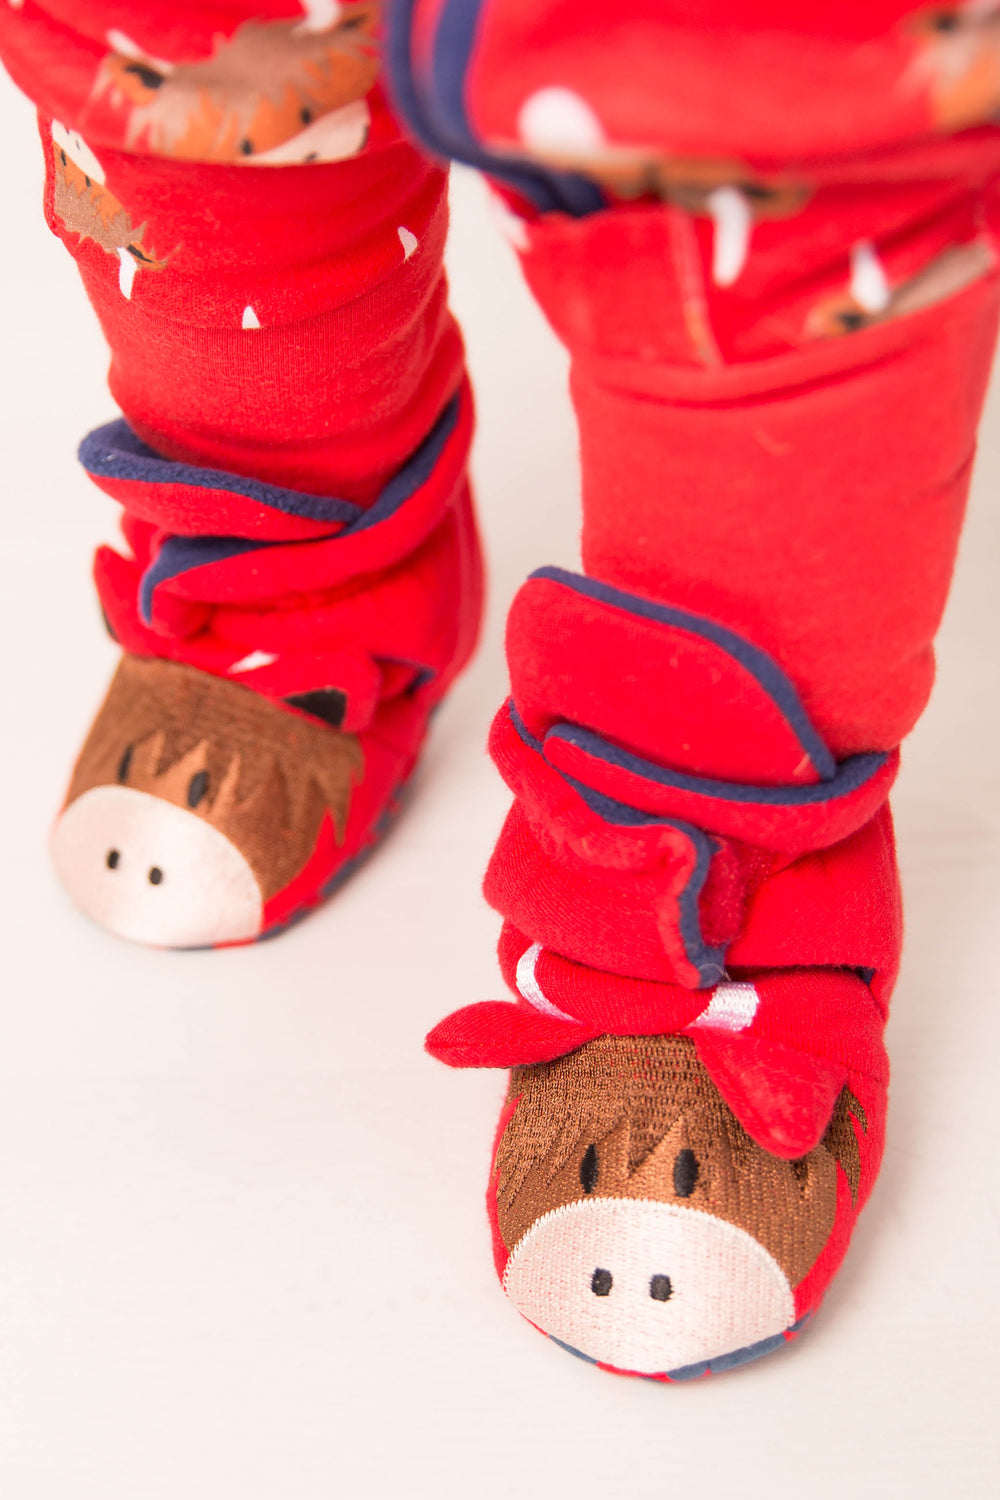 Hamish Highland Cow Booties